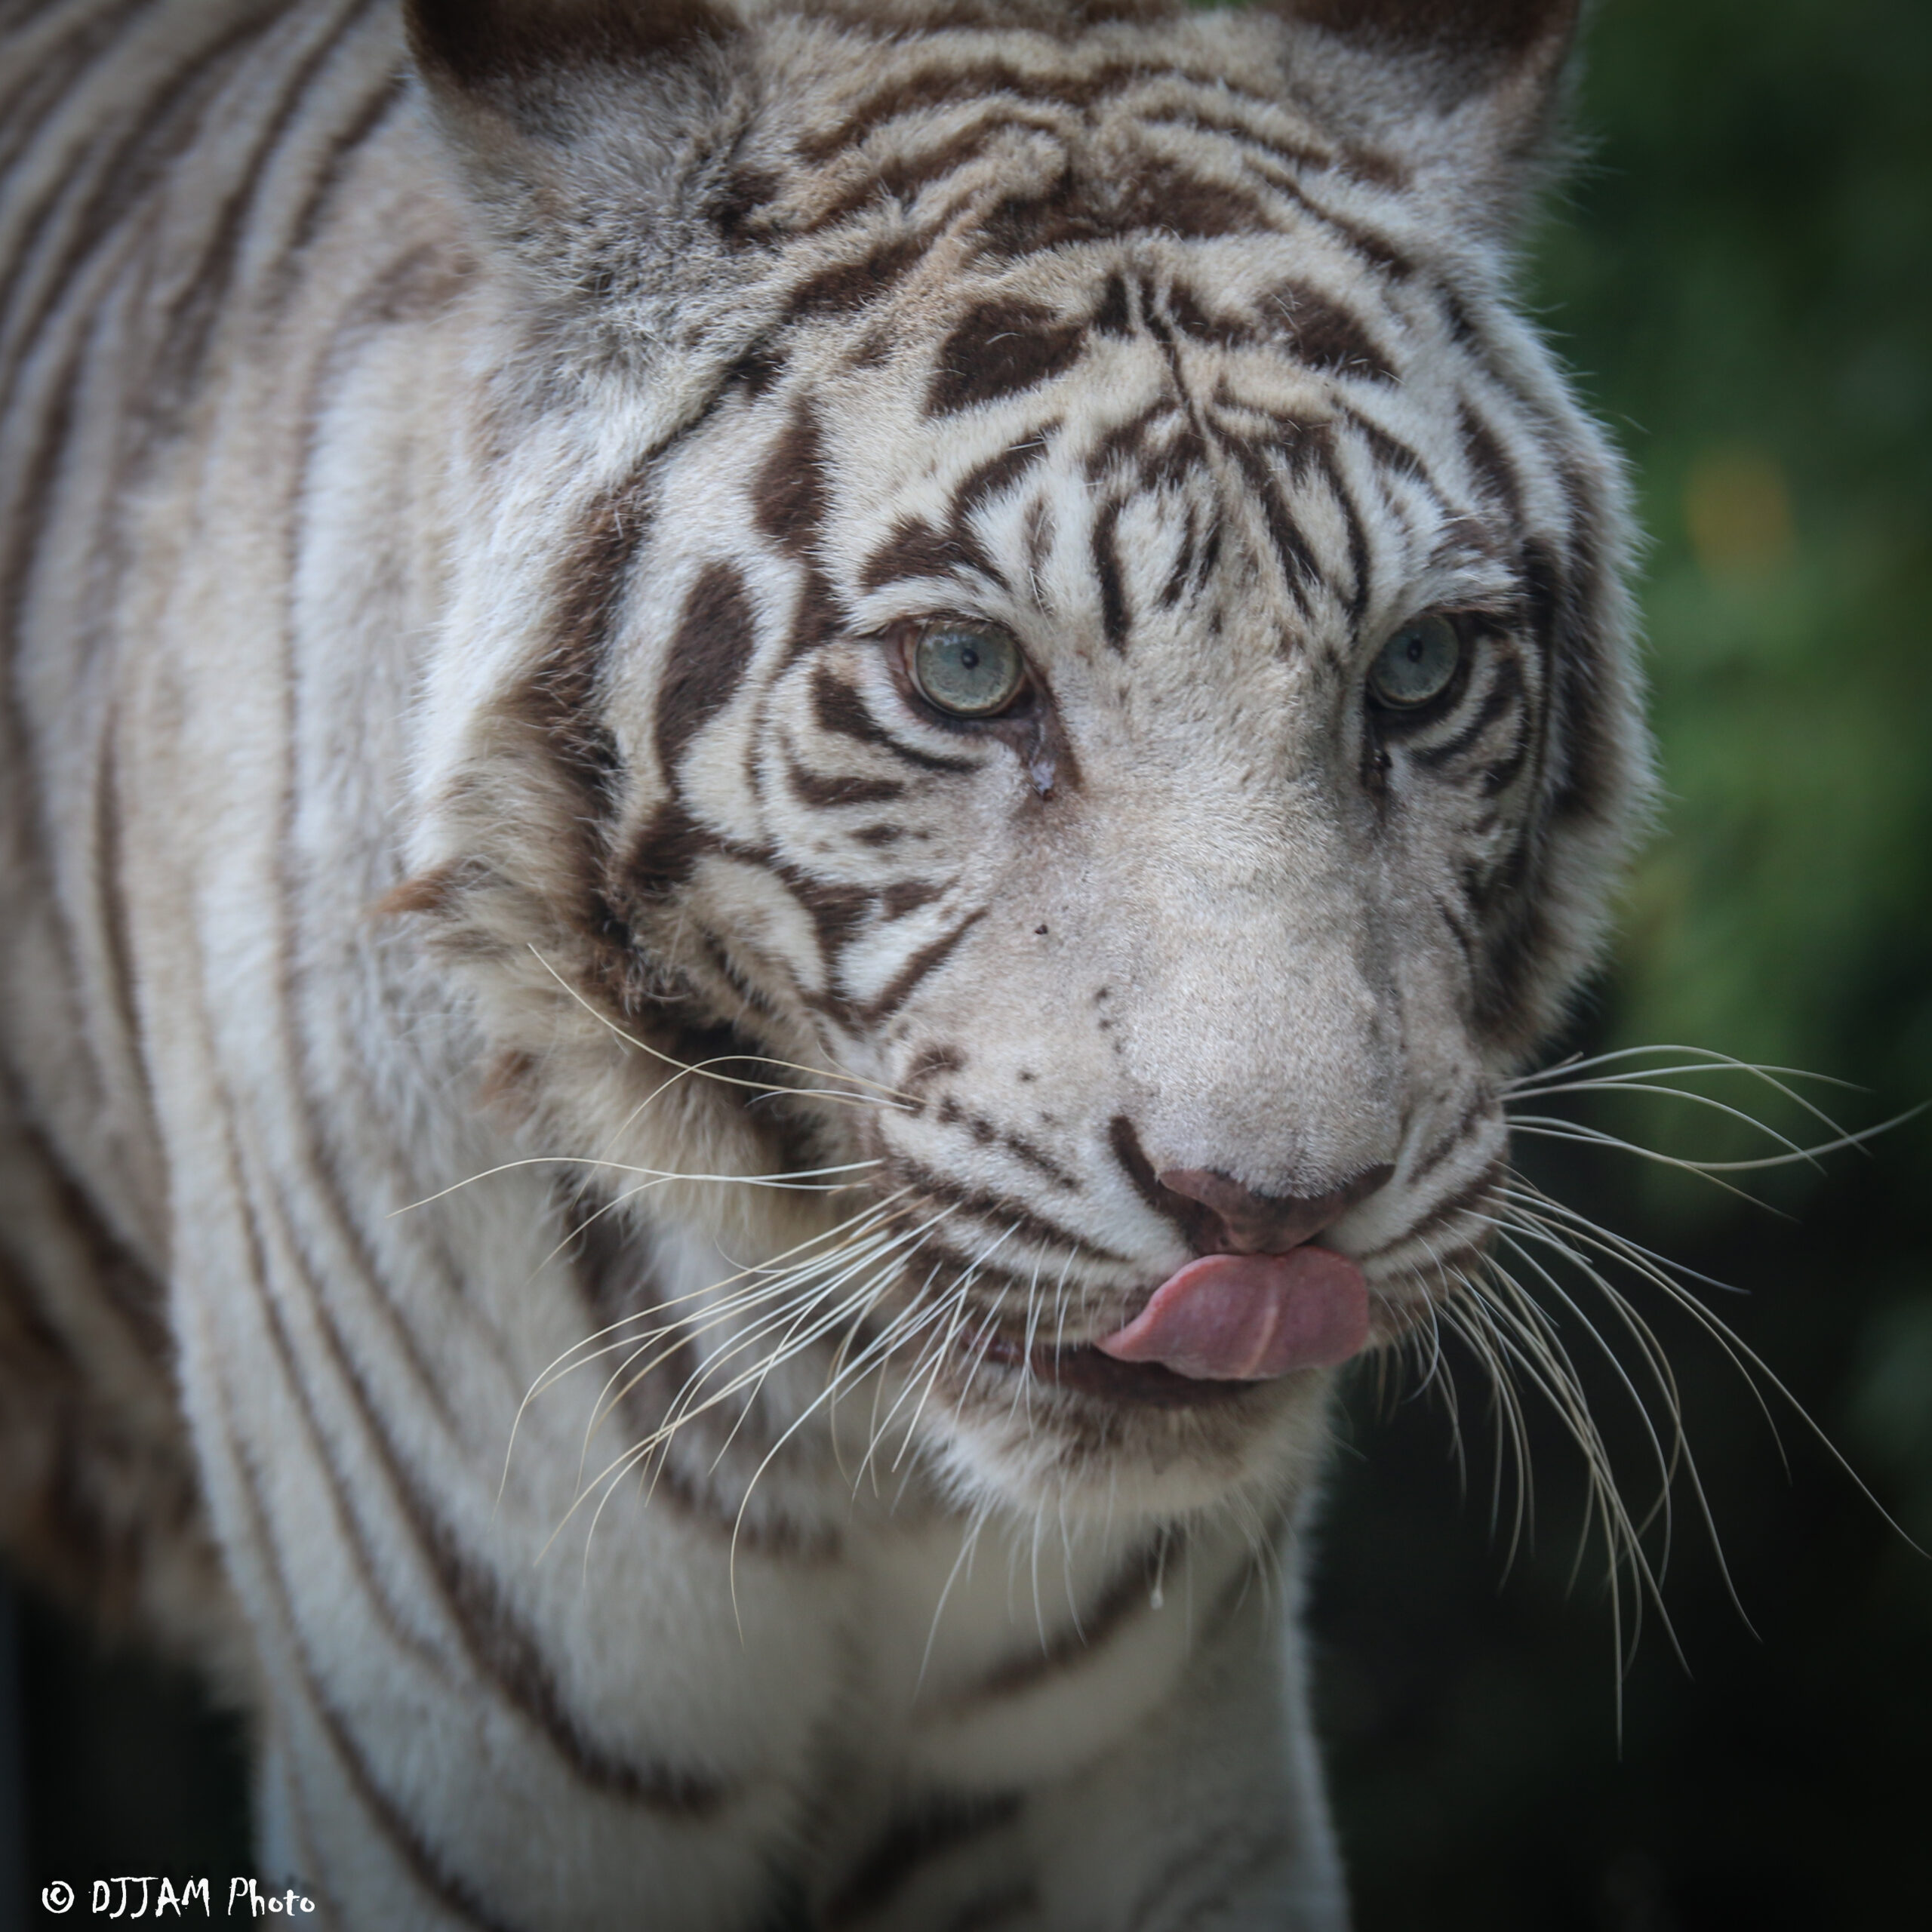 Popsy the white tiger tongue out